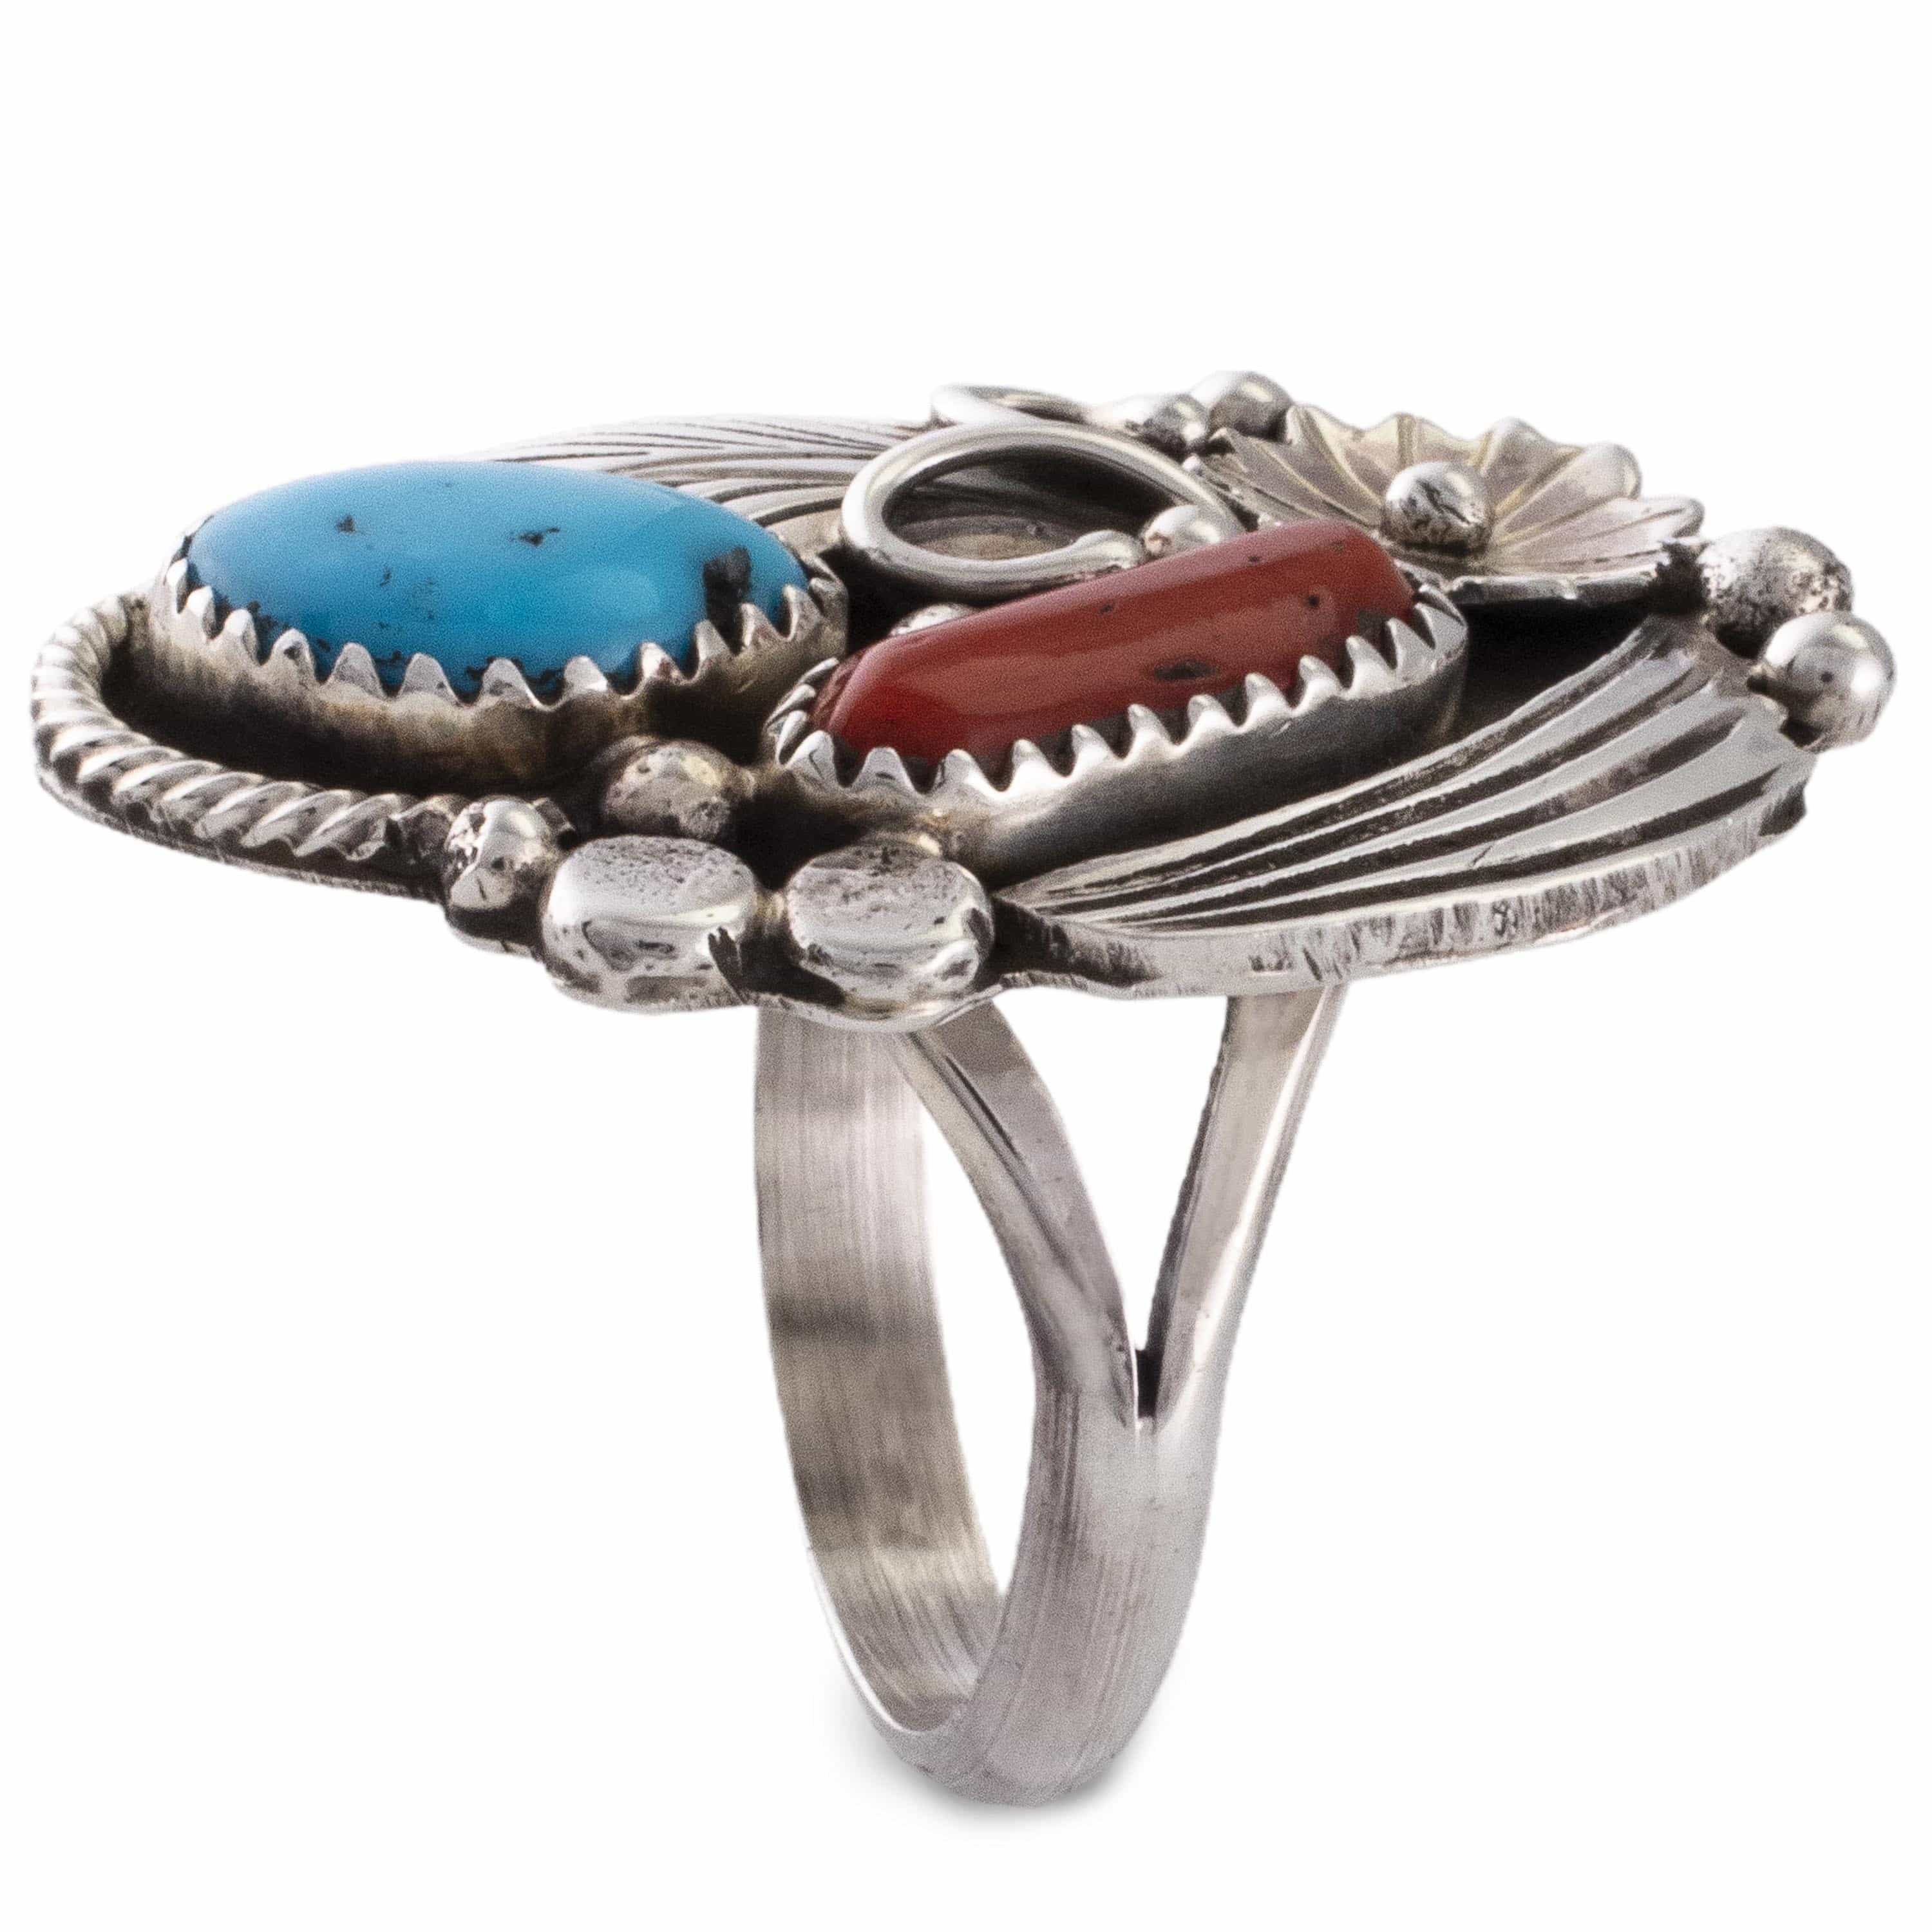 Kalifano Native American Jewelry 8 Sleeping Beauty Turquoise and Coral USA Native American Made 925 Sterling Silver Ring NAR500.066.8